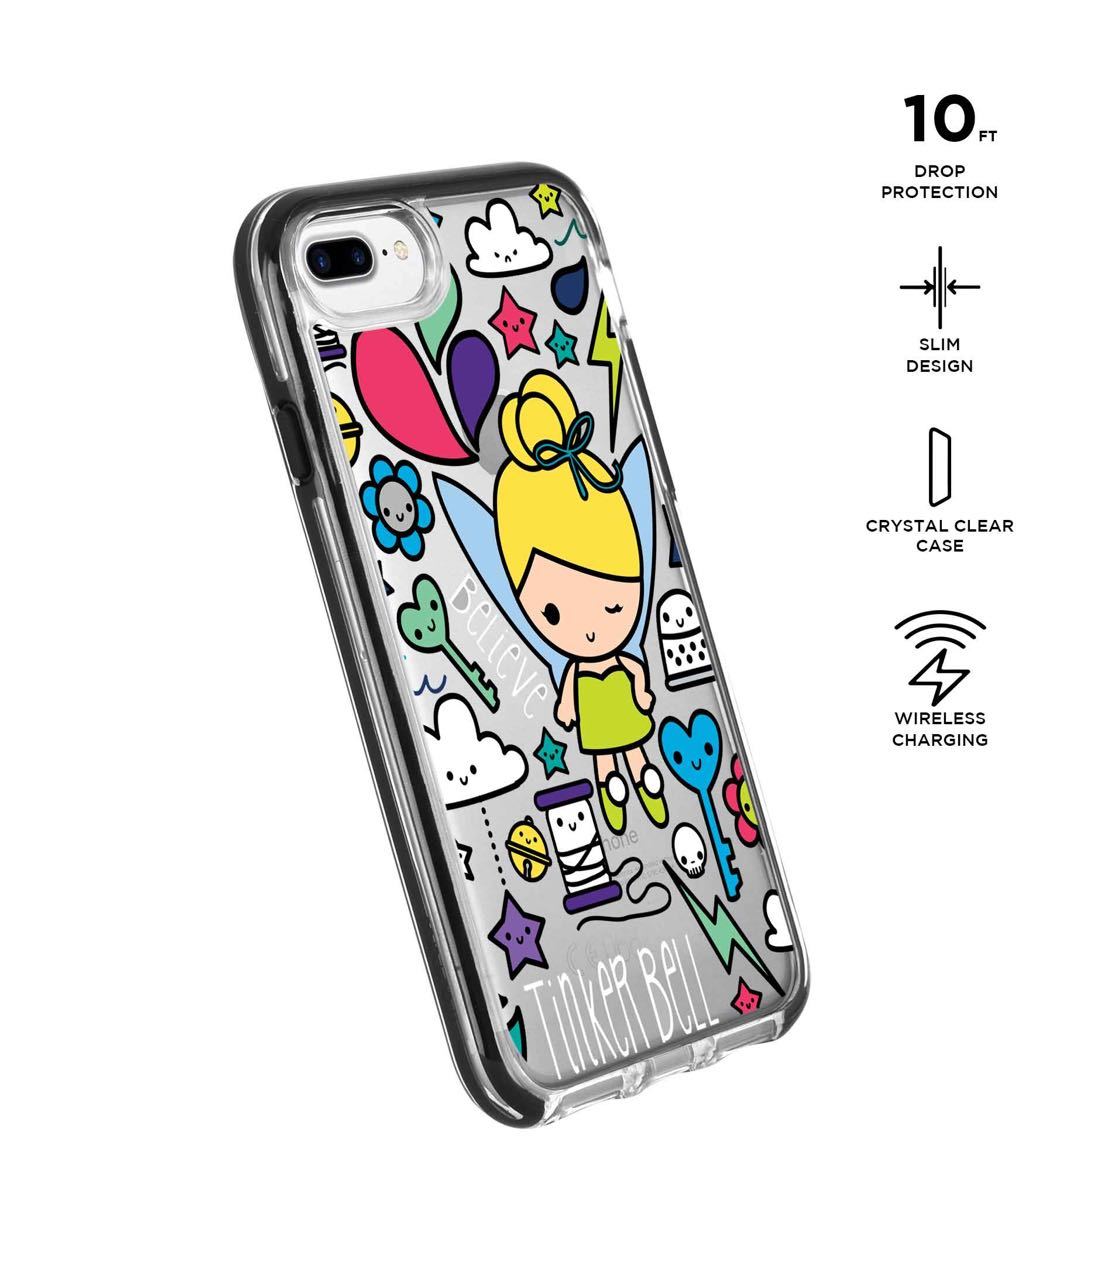 Tinker World - Extreme Phone Case for iPhone 7 Plus